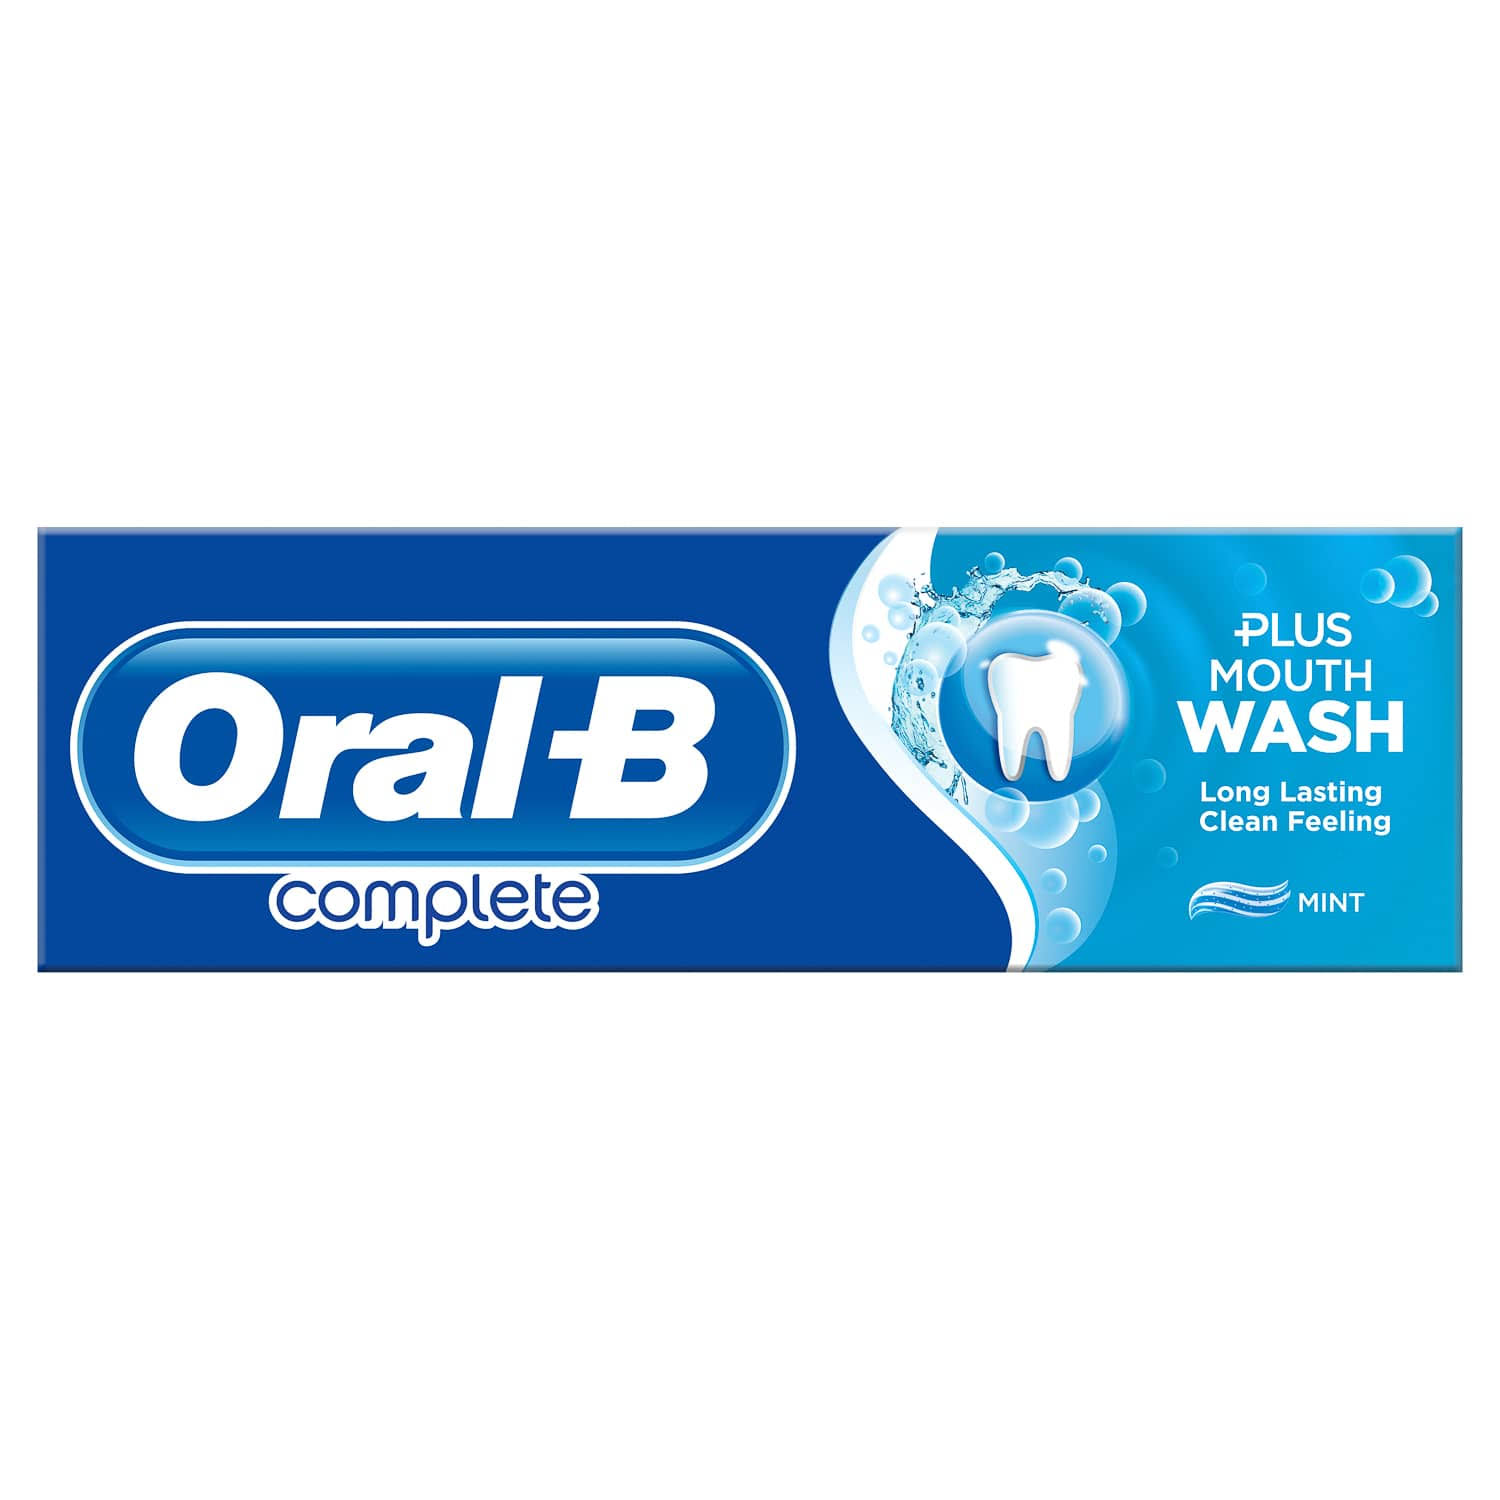 Oral-B Complete Toothpaste - Extreme Mint, 75ml